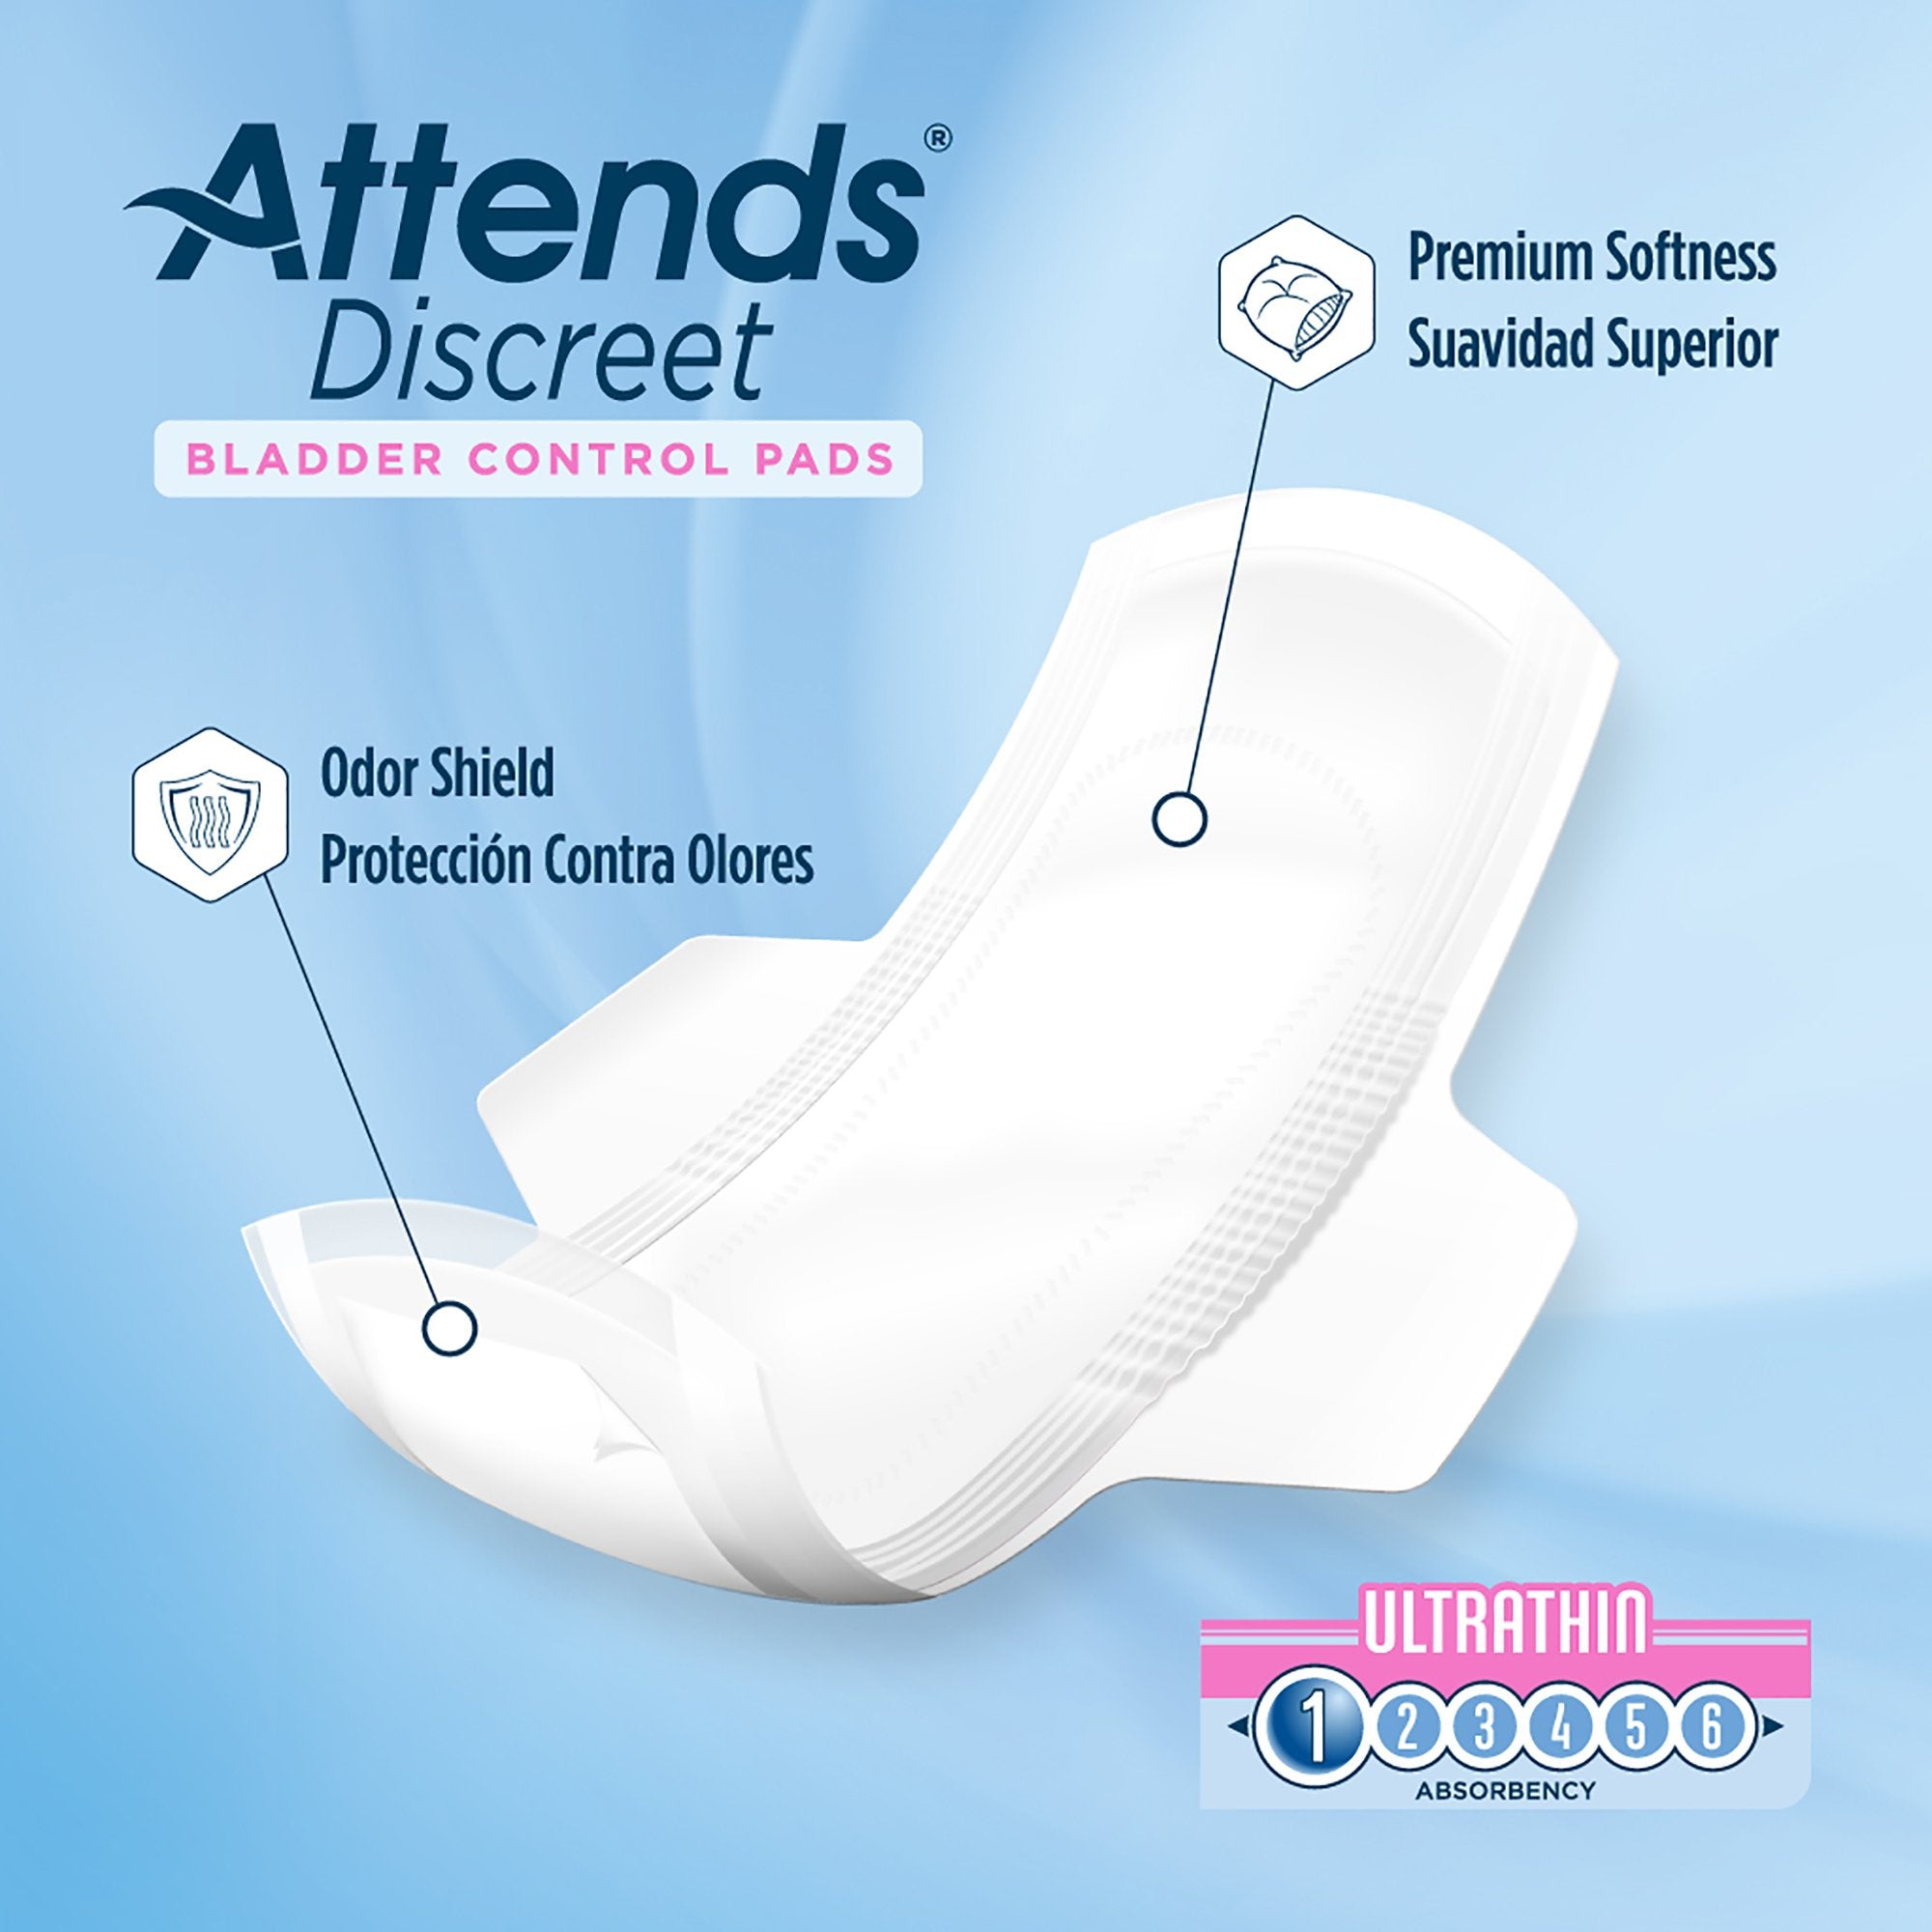 Bladder Control Pad Attends Discreet Ultra Thin 9 Inch Length Light Absorbency Polymer Core One Size Fits Most